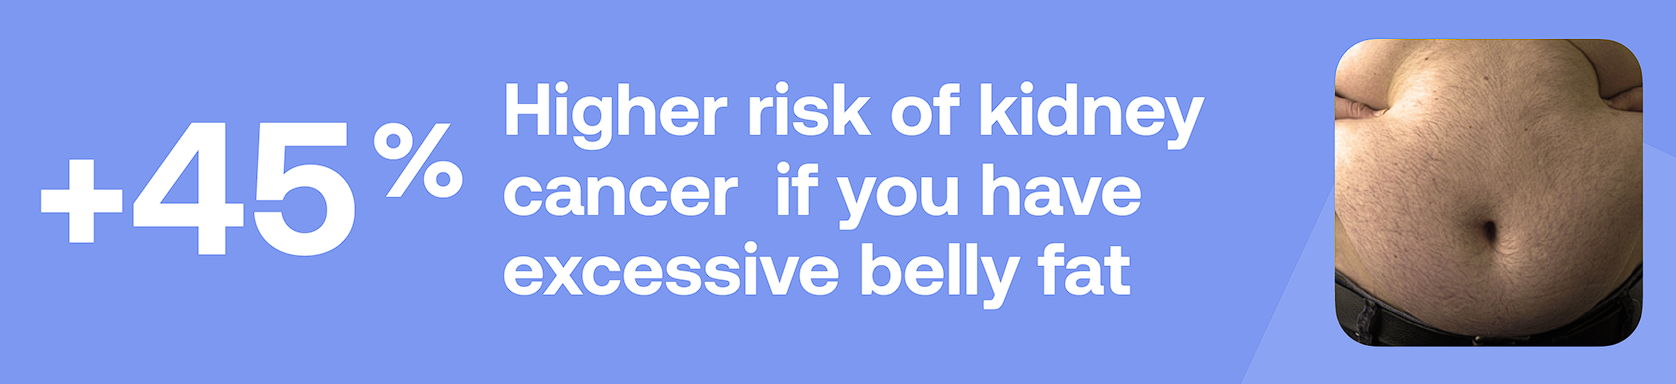 +45% Higher risk of kidney cancer if you have excessive belly fat